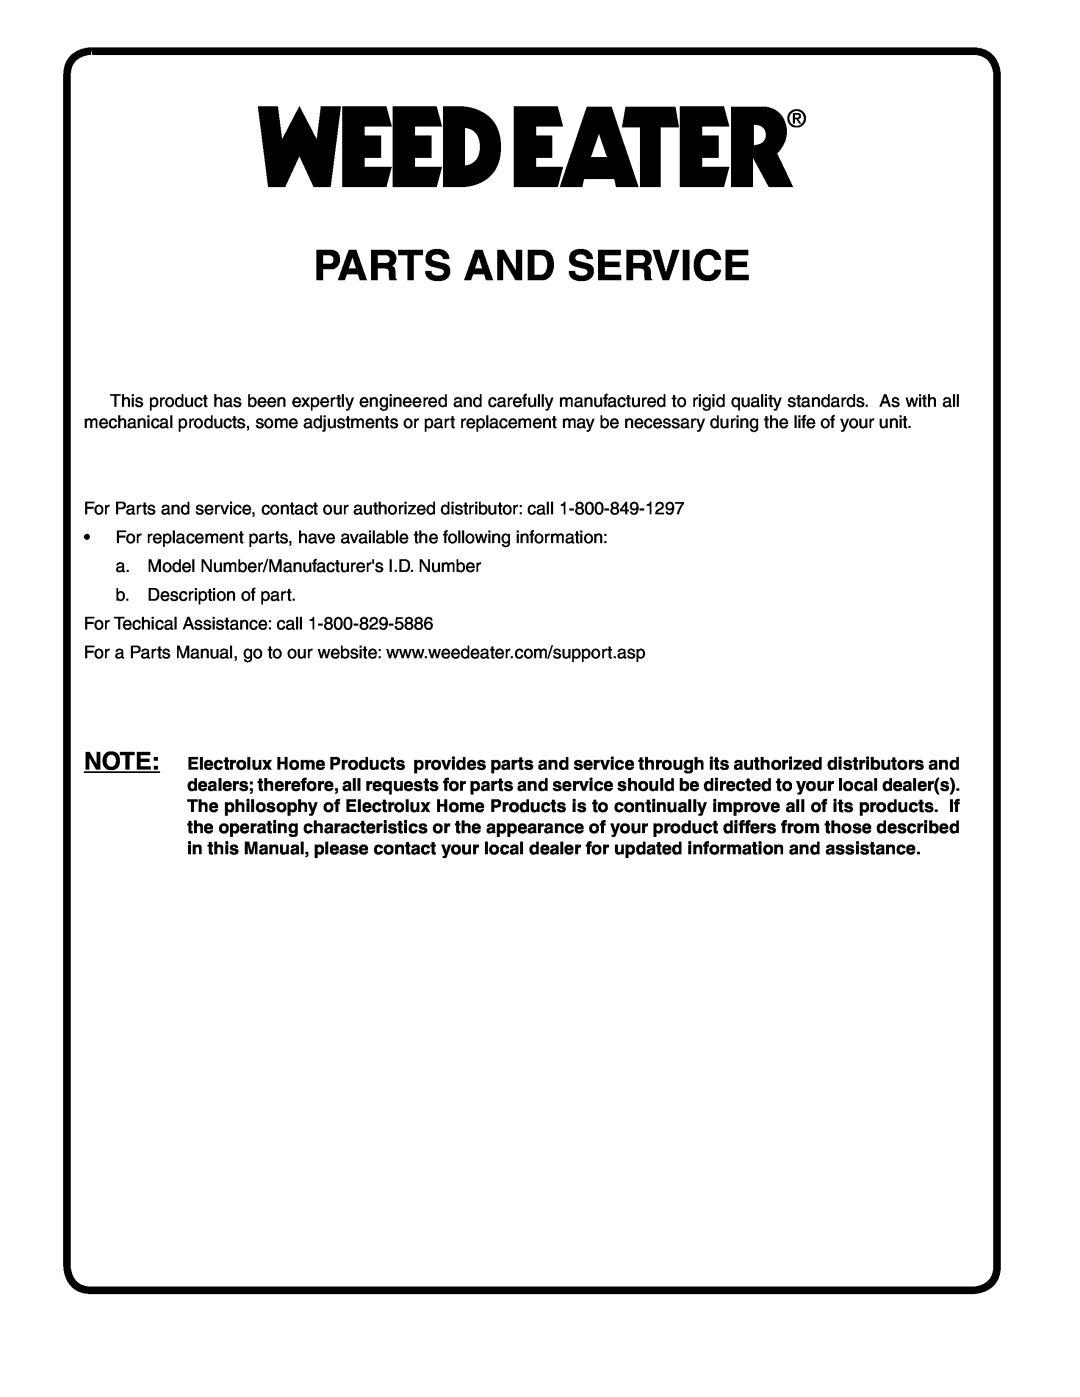 Poulan HD13538 manual Parts And Service 